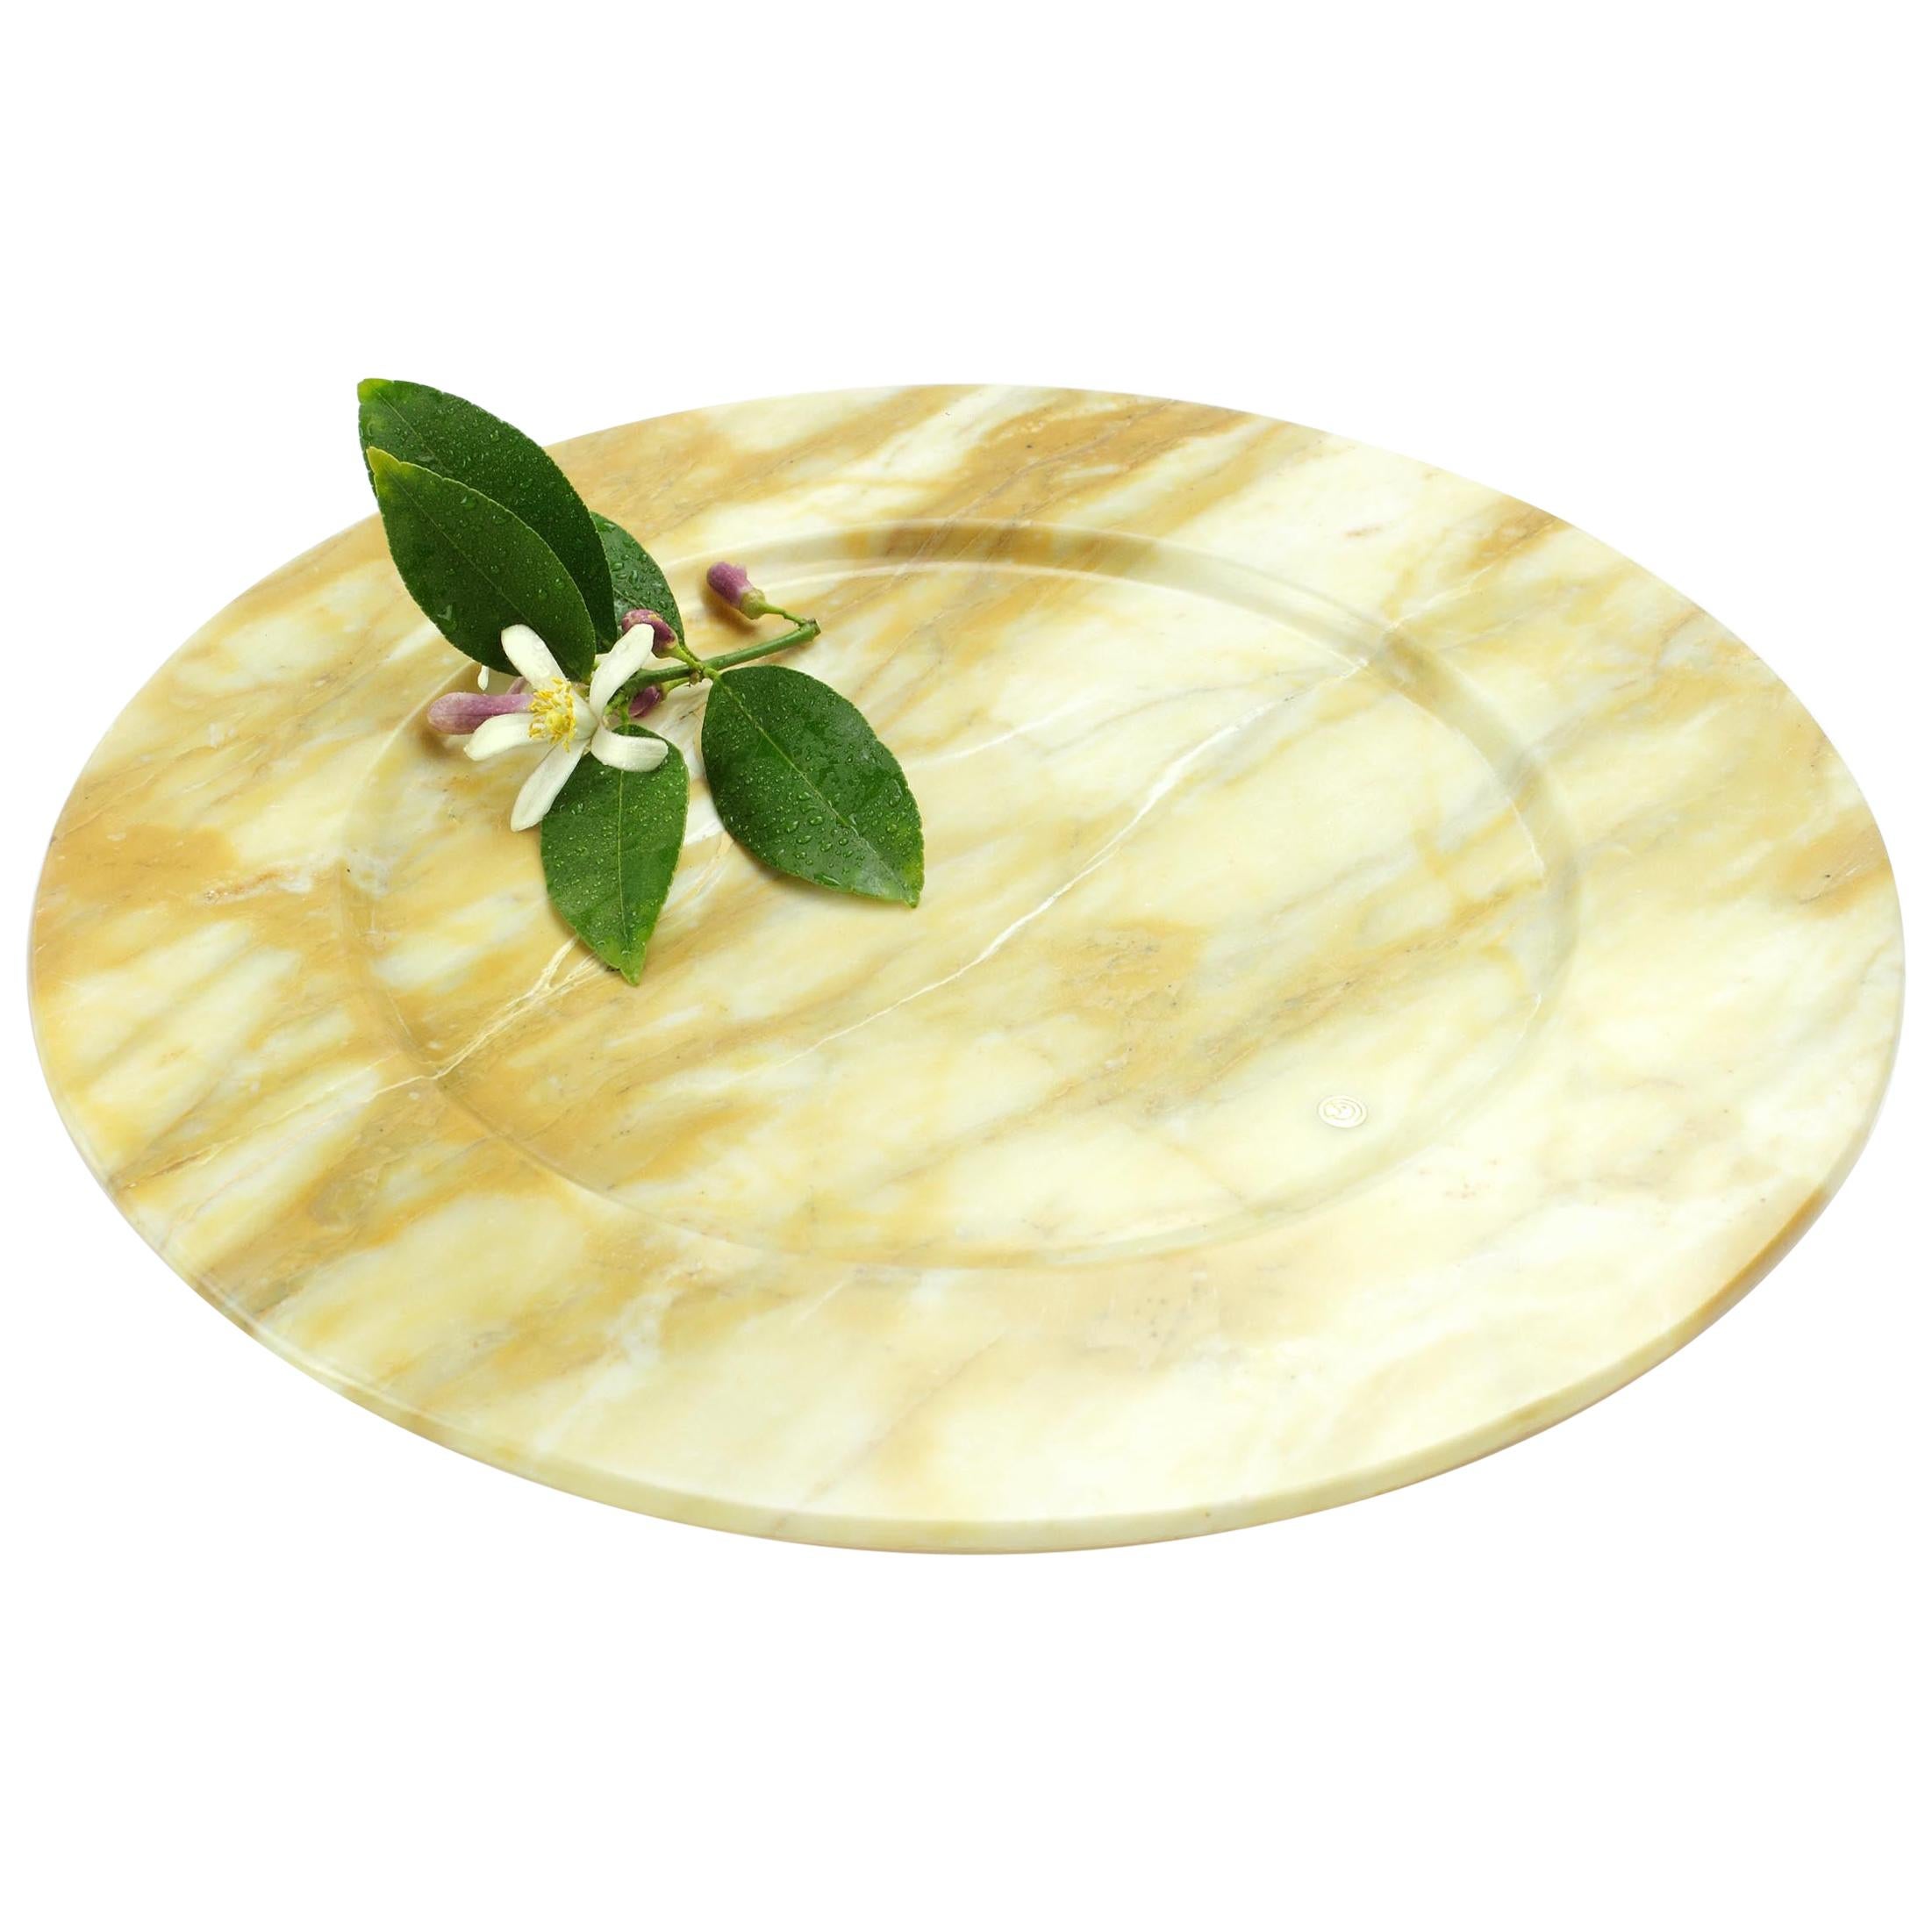 Charger Plate Platters Serveware Yellow Siena Marble Collectible Design Handmade